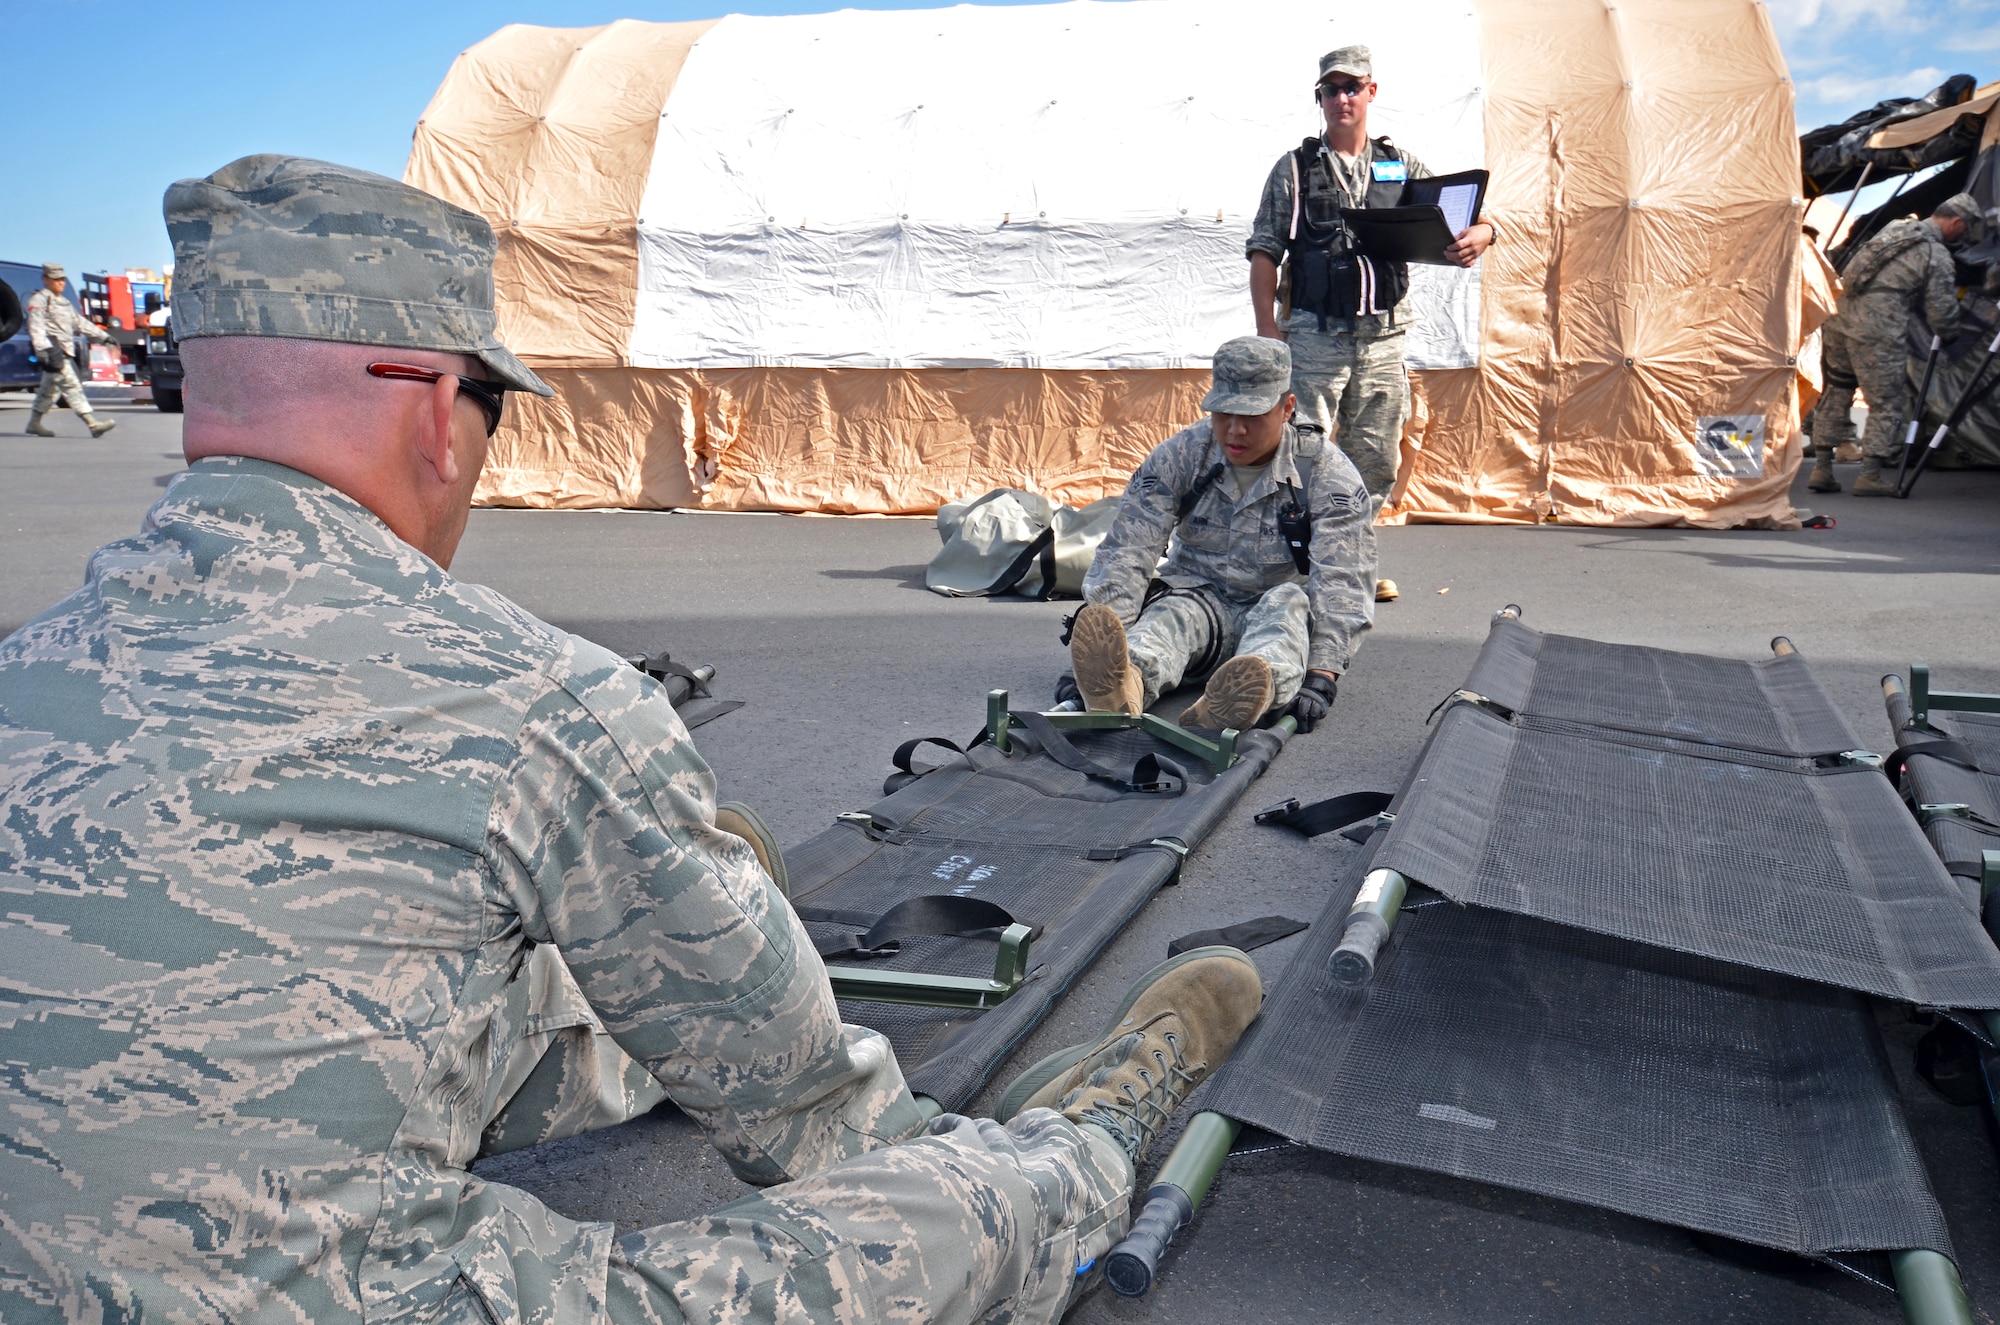 1 Lt. William Crandell (left) and Senior Airman Anthony Ahn from the 141st Medical Squadron prepare stretchers for patient transport during the HRF evaluation. (U.S. Air Force Photo by Staff Sgt. Anthony Ennamorato)